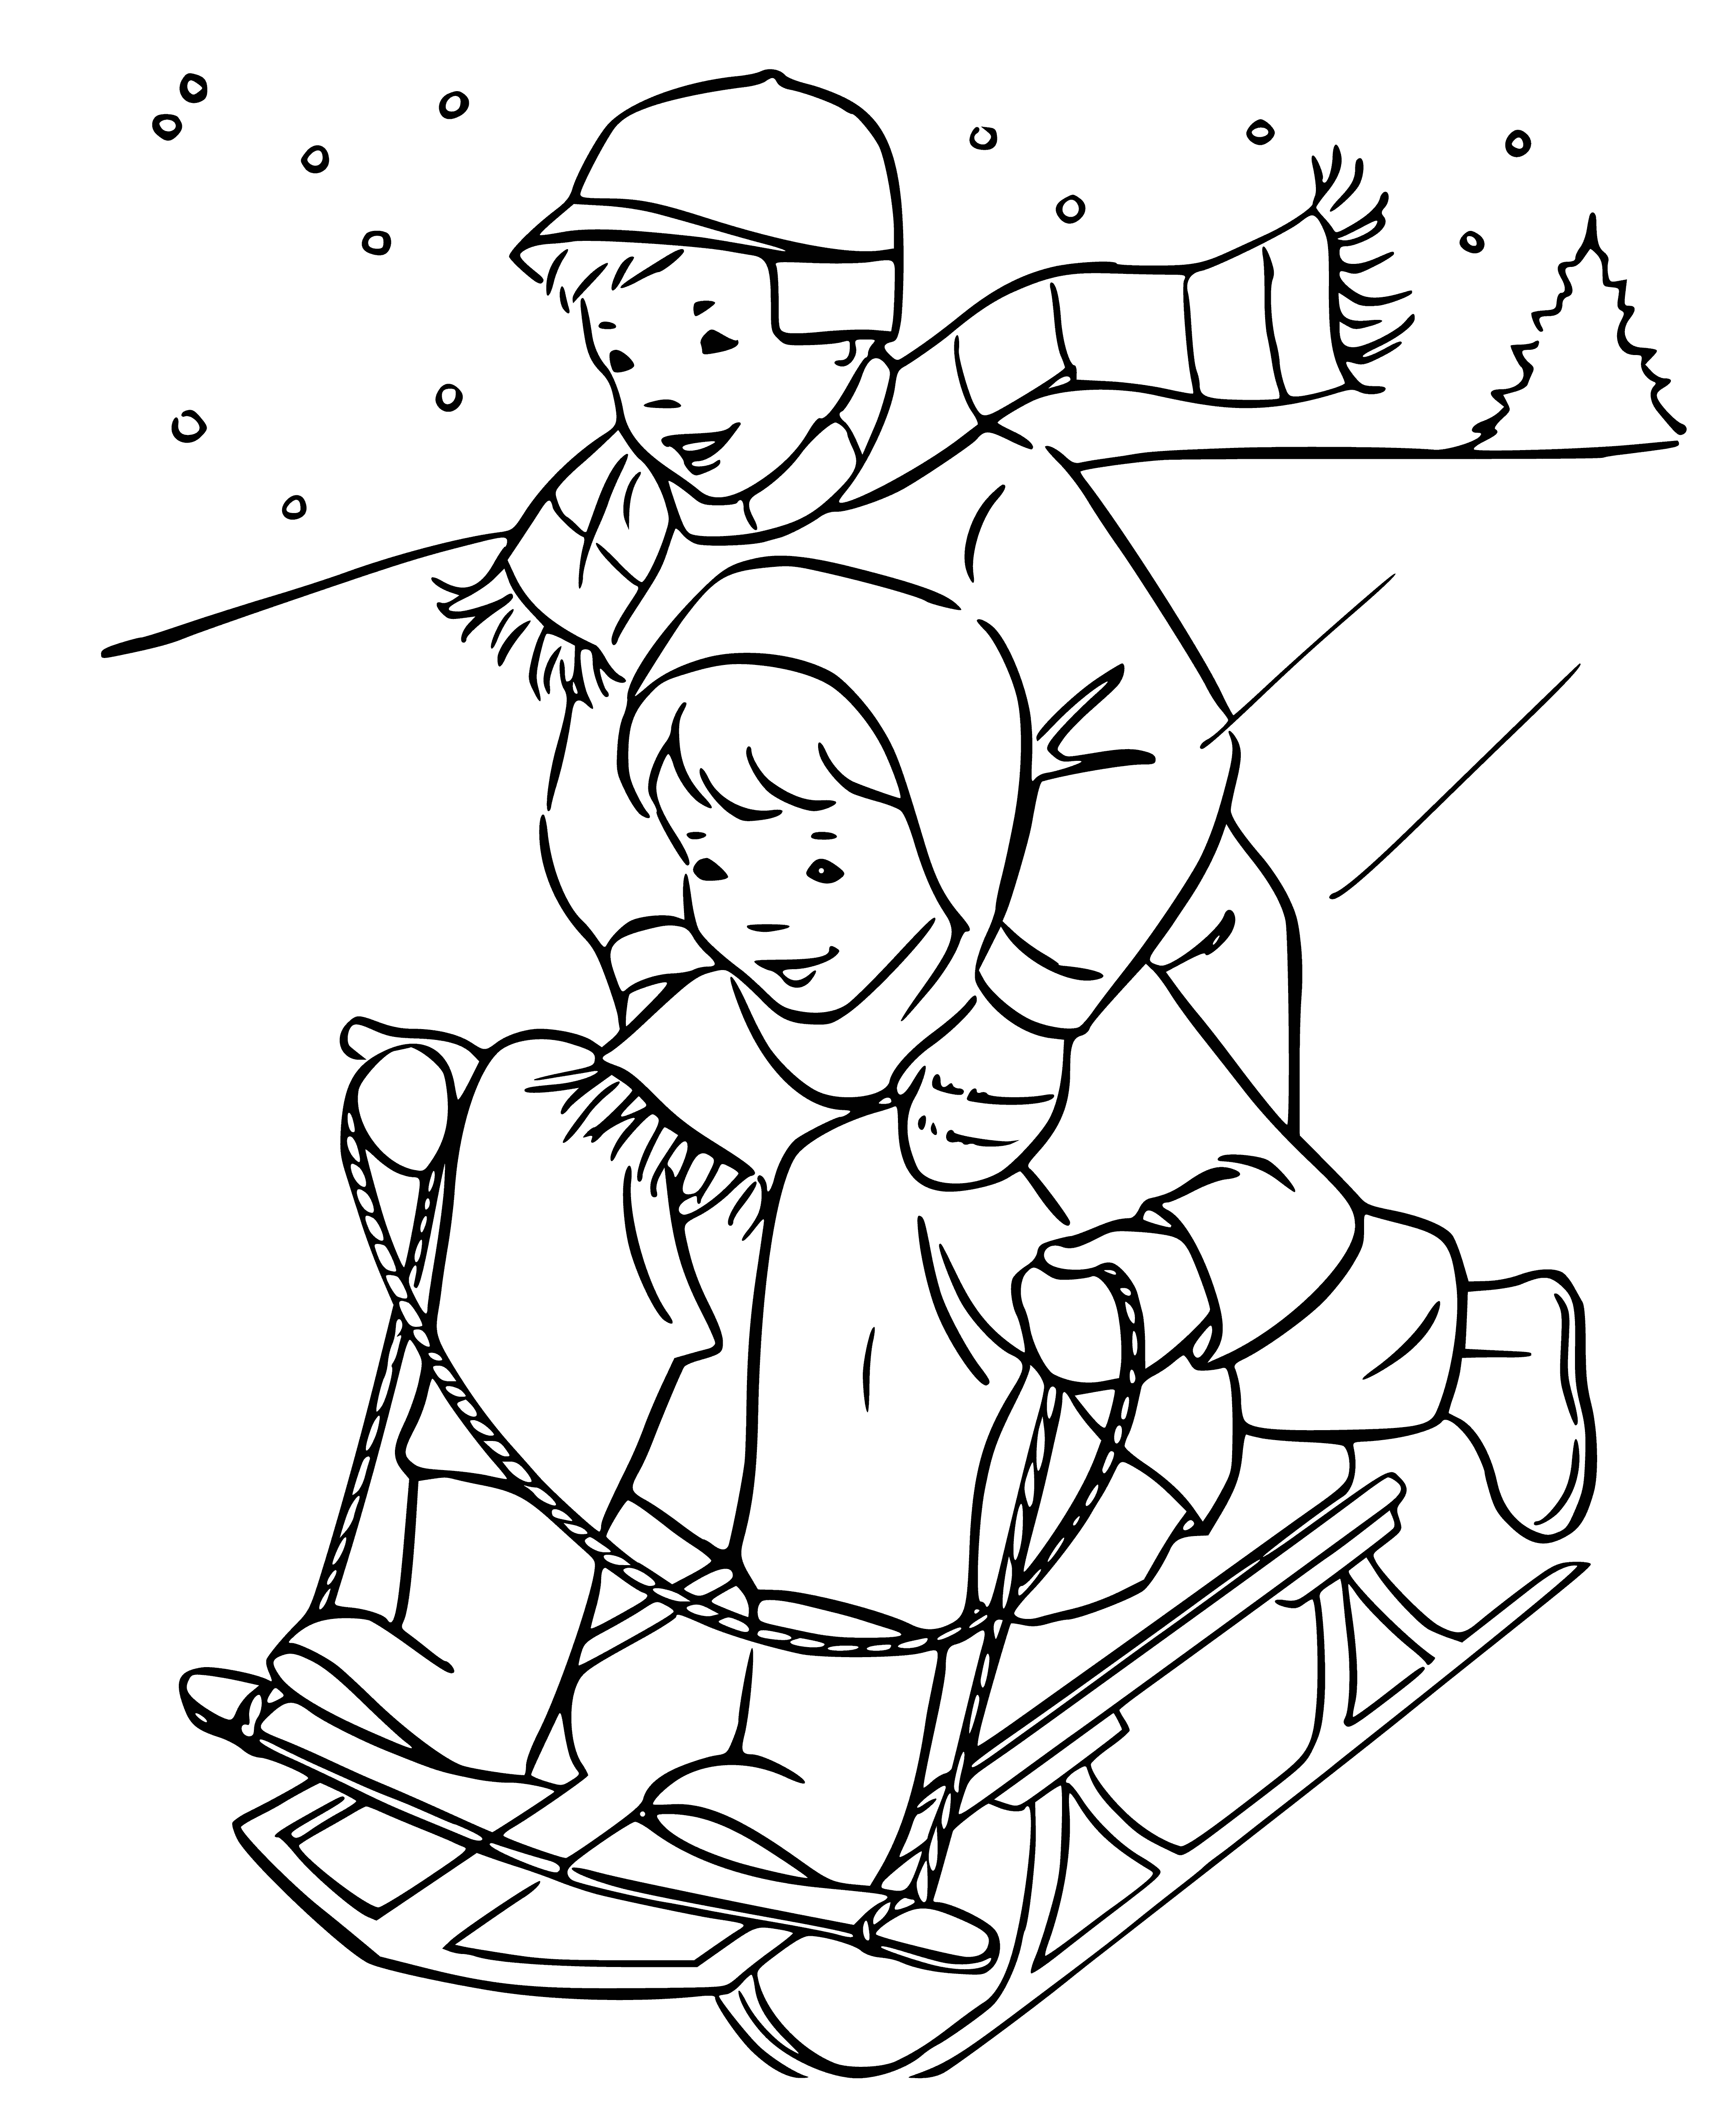 Children are sledding coloring page